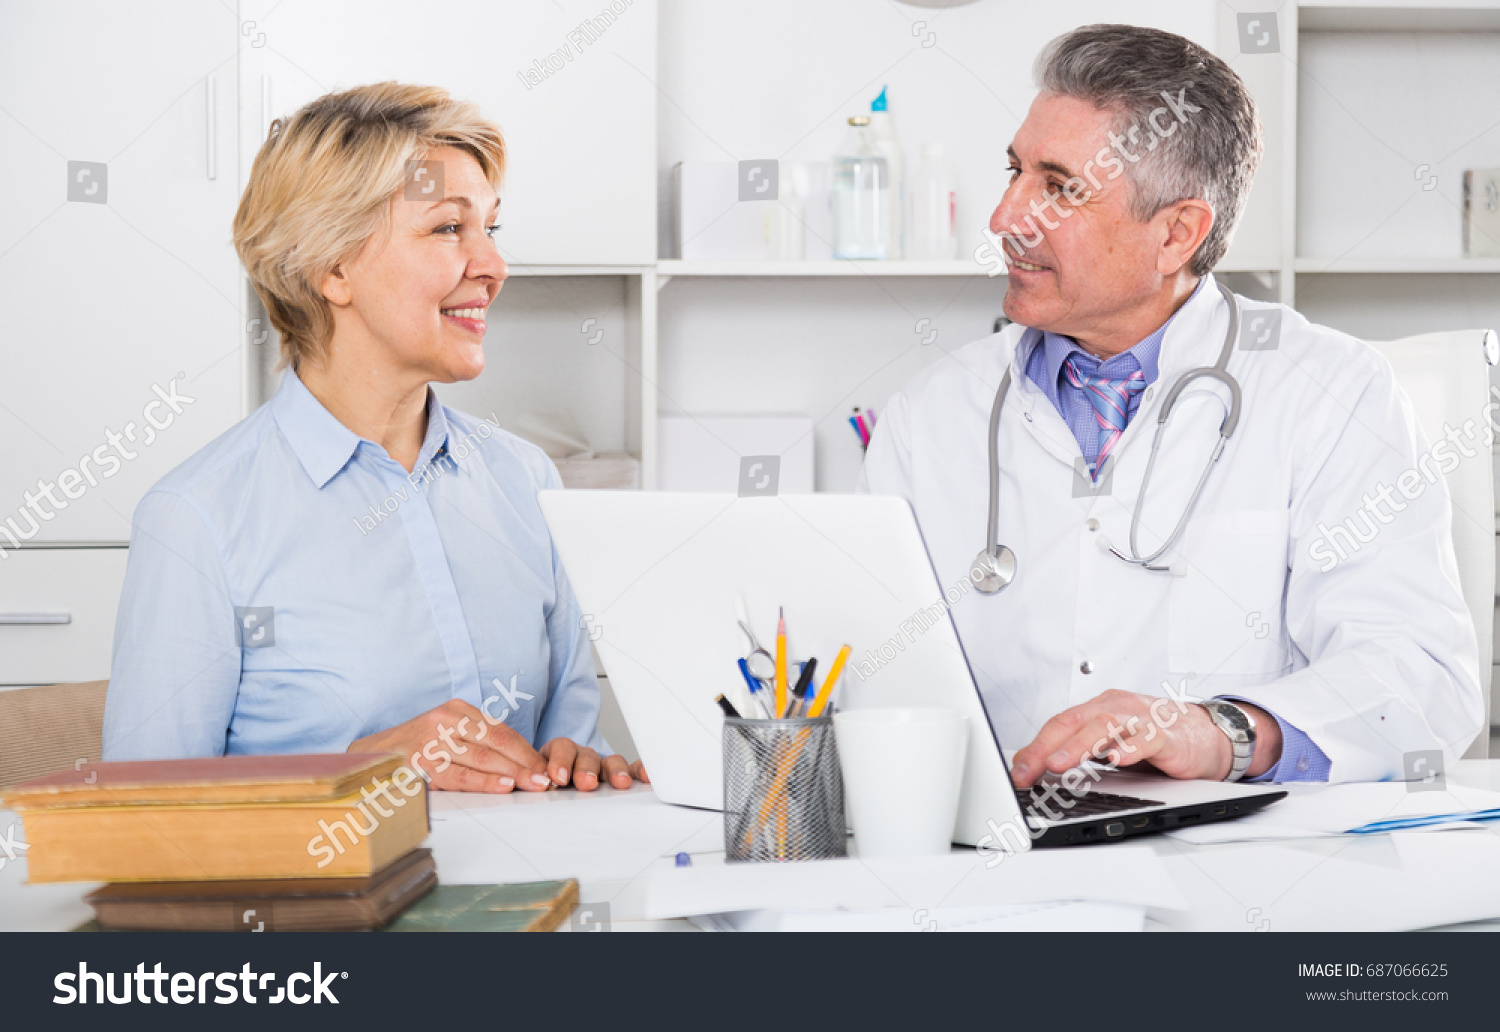 Mature woman visits doctor to medical office for planned inspection of health #687066625